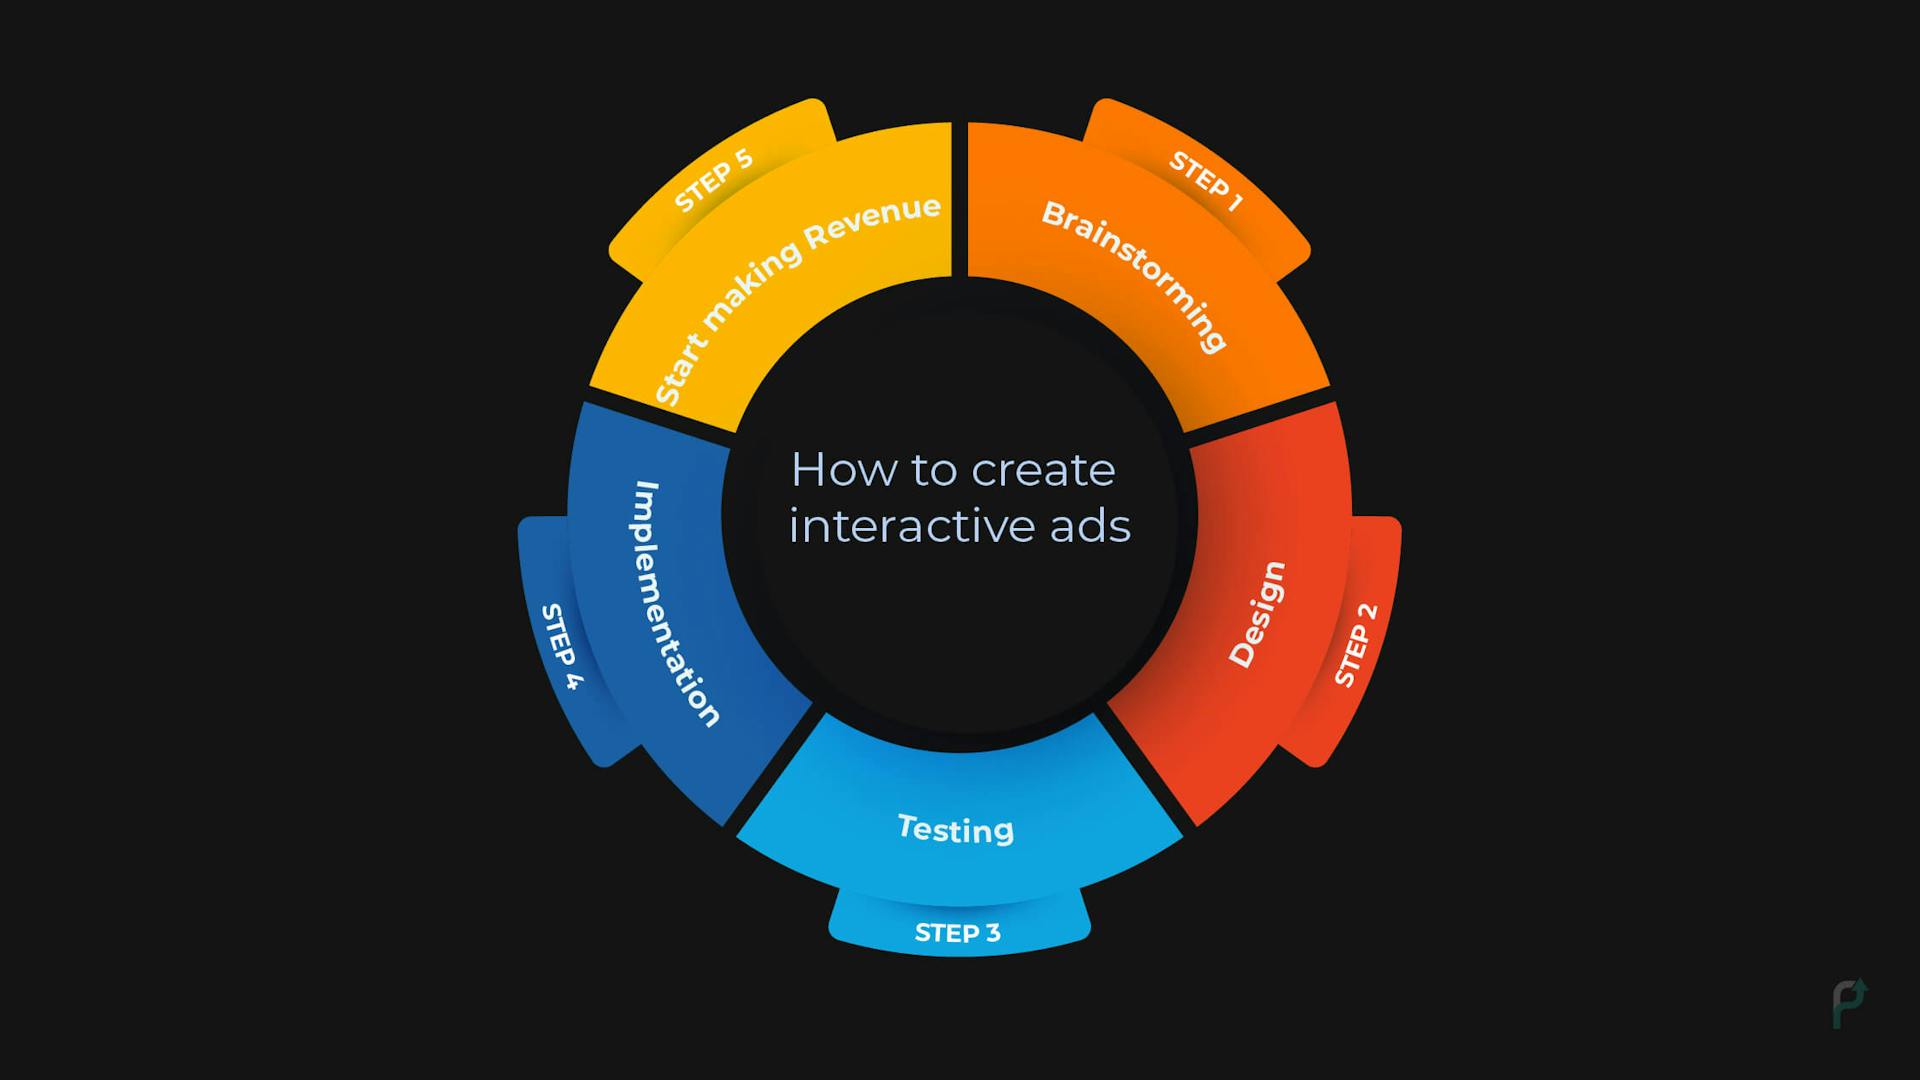 How to create interactive ads